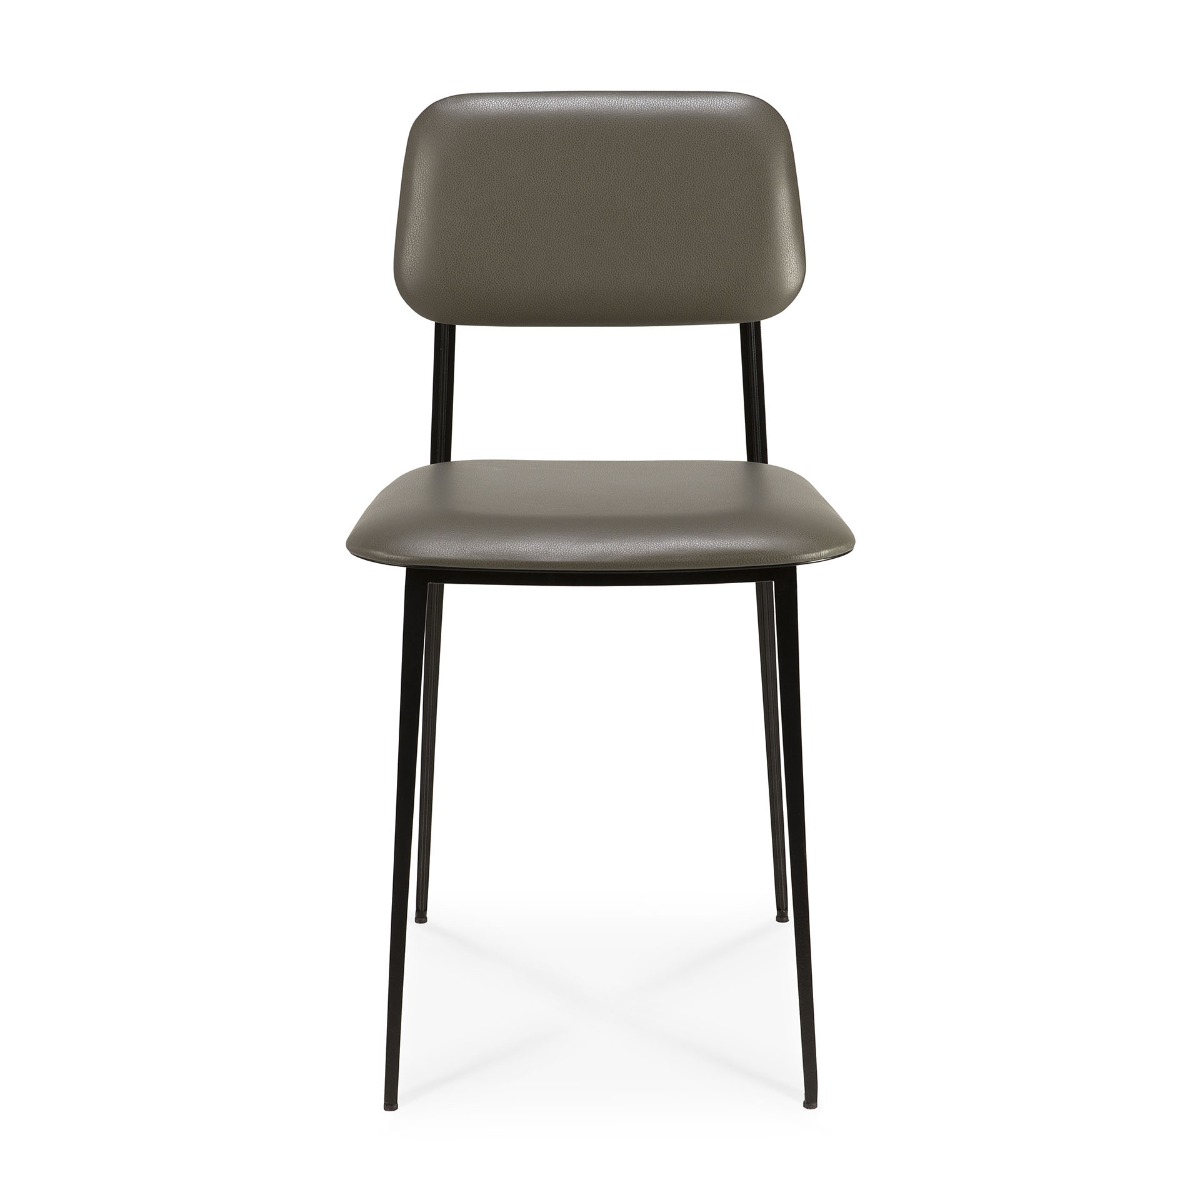 DC dining chair in olive green leather